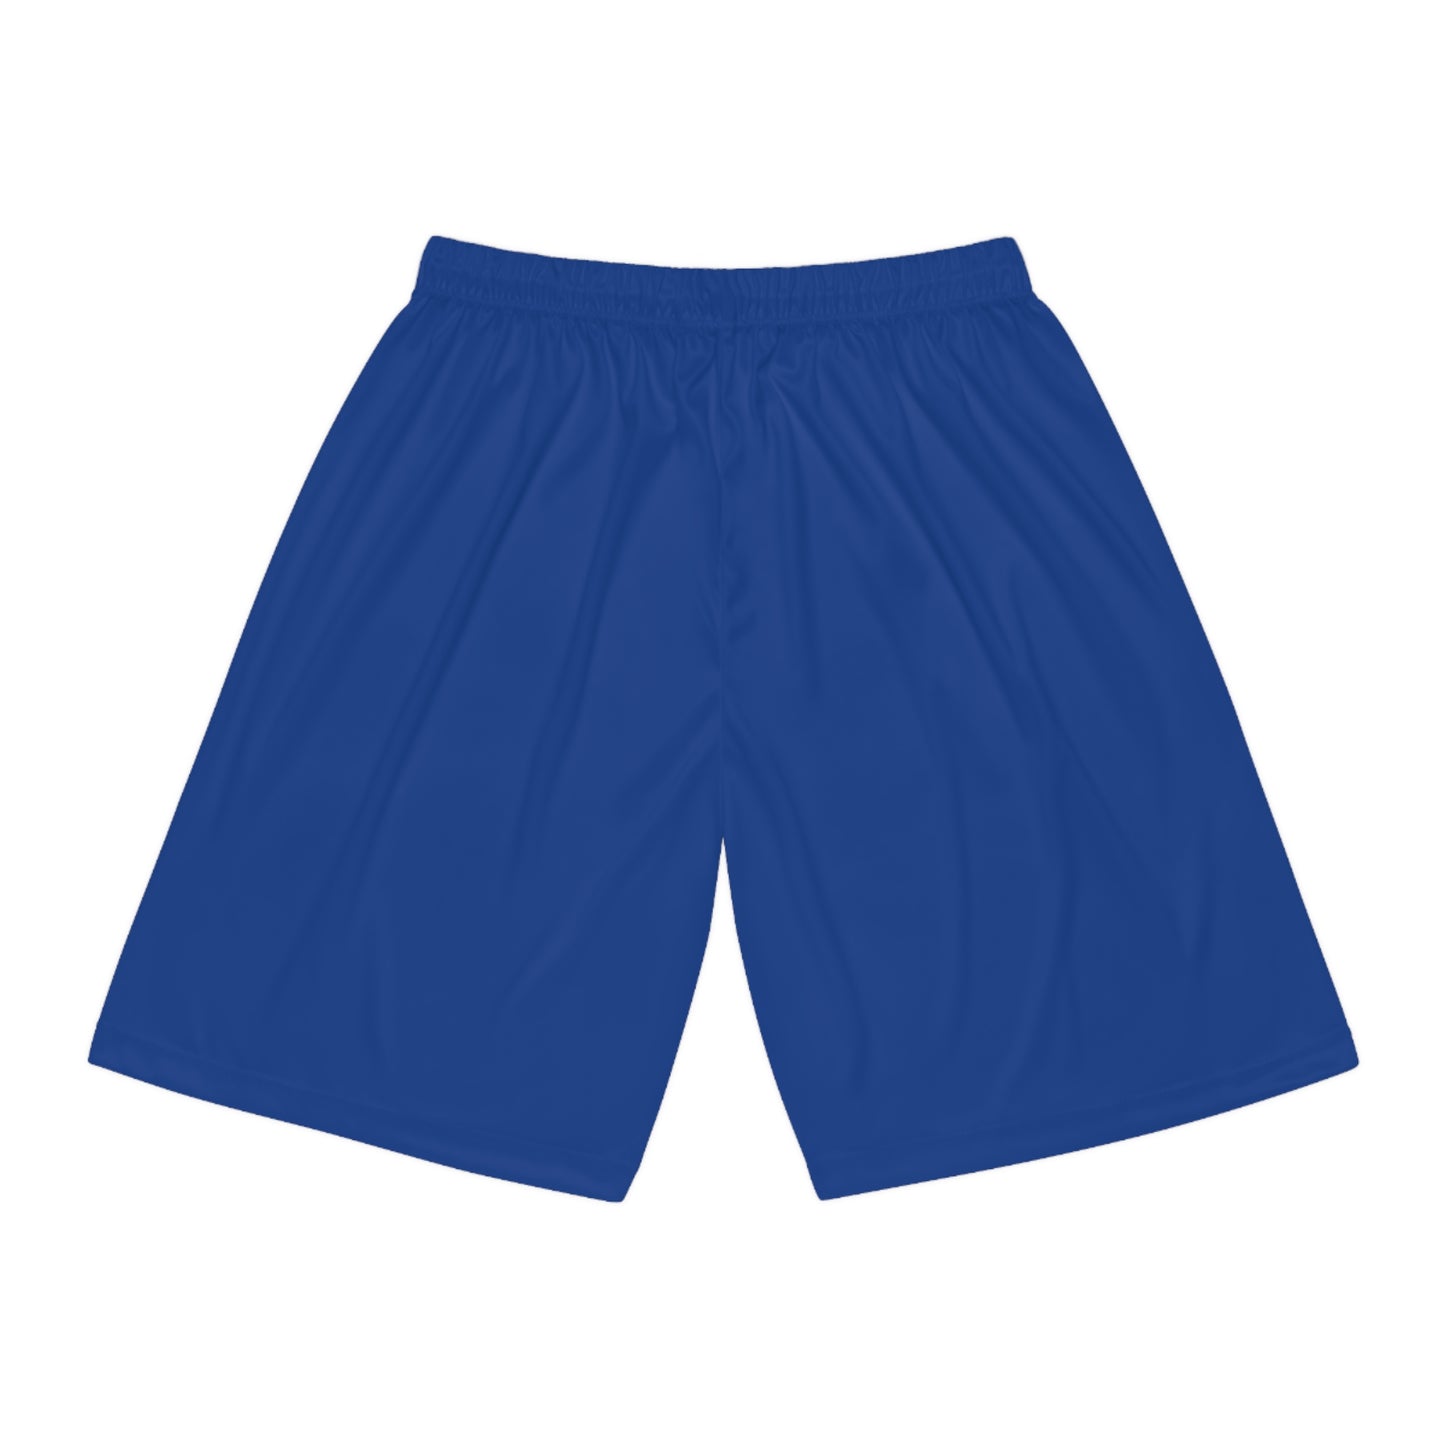 theDopeOnes Finals Shorts (Knicks)